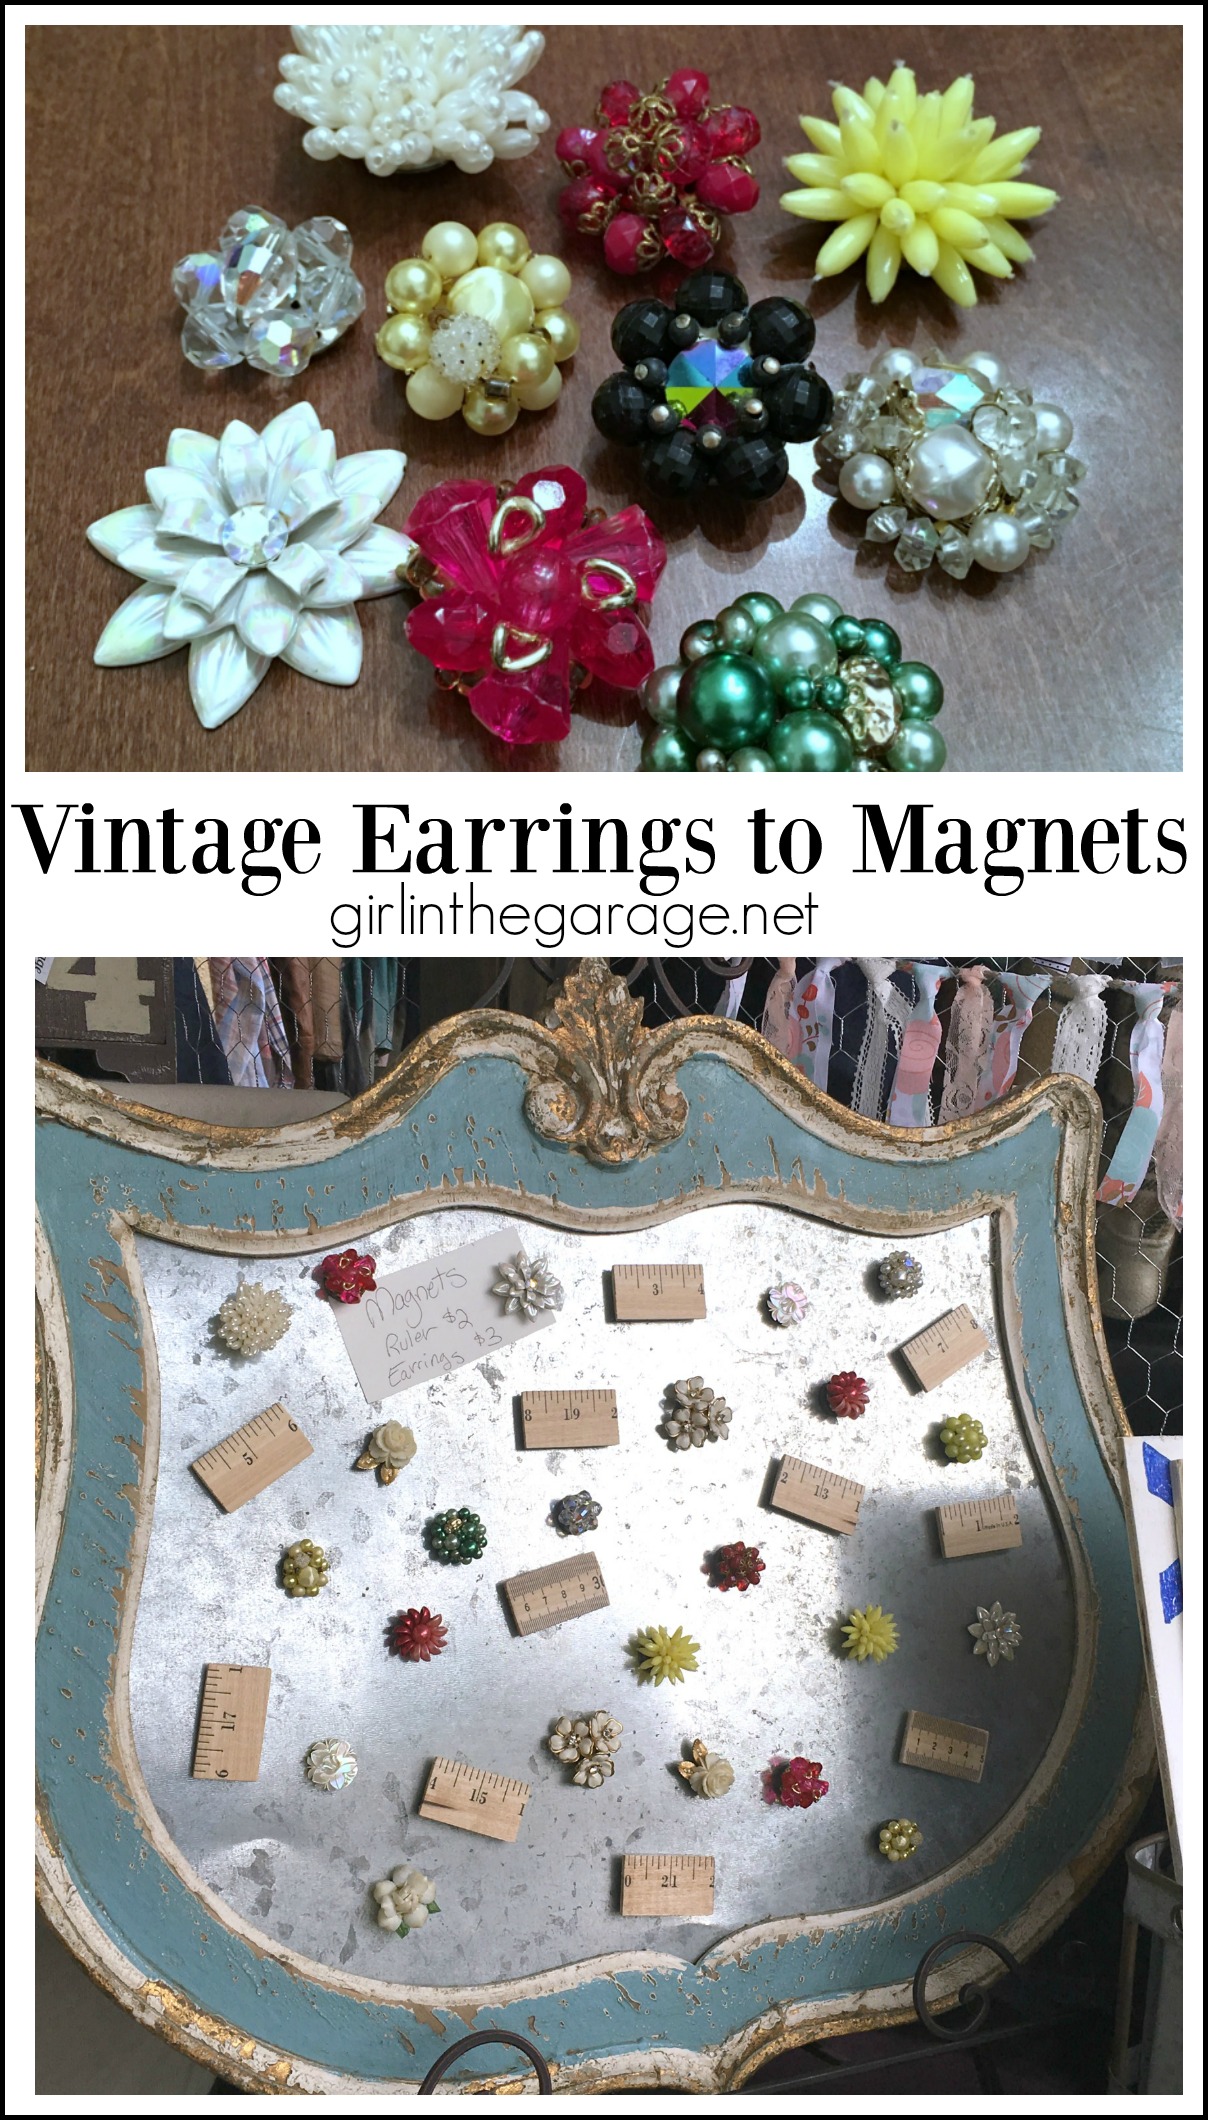 How to make vintage repurposed earring magnets - easy DIY tutorial by Girl in the Garage